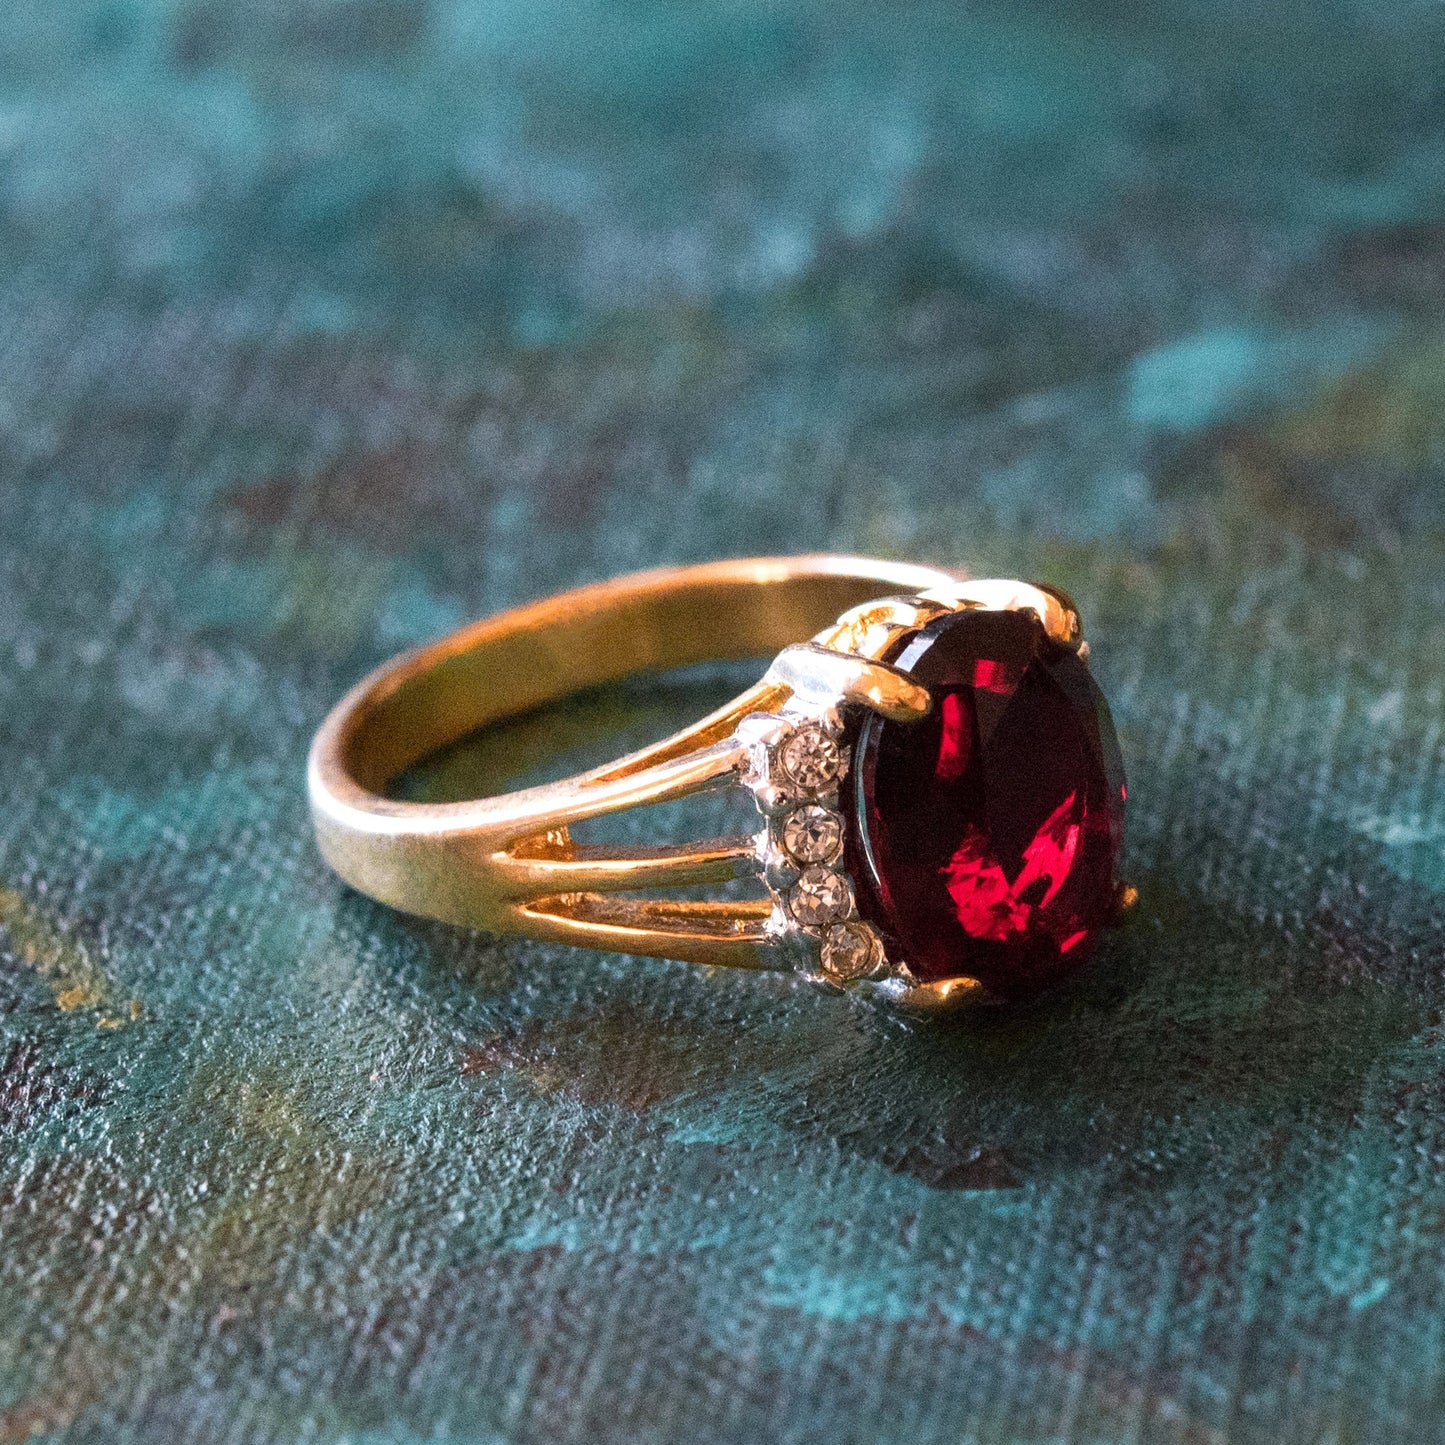 Vintage Ring 1980's Garnet Cubic Zirconia Ring with Clear Swarovski Crystals 18k Gold Size 10 Only R1664